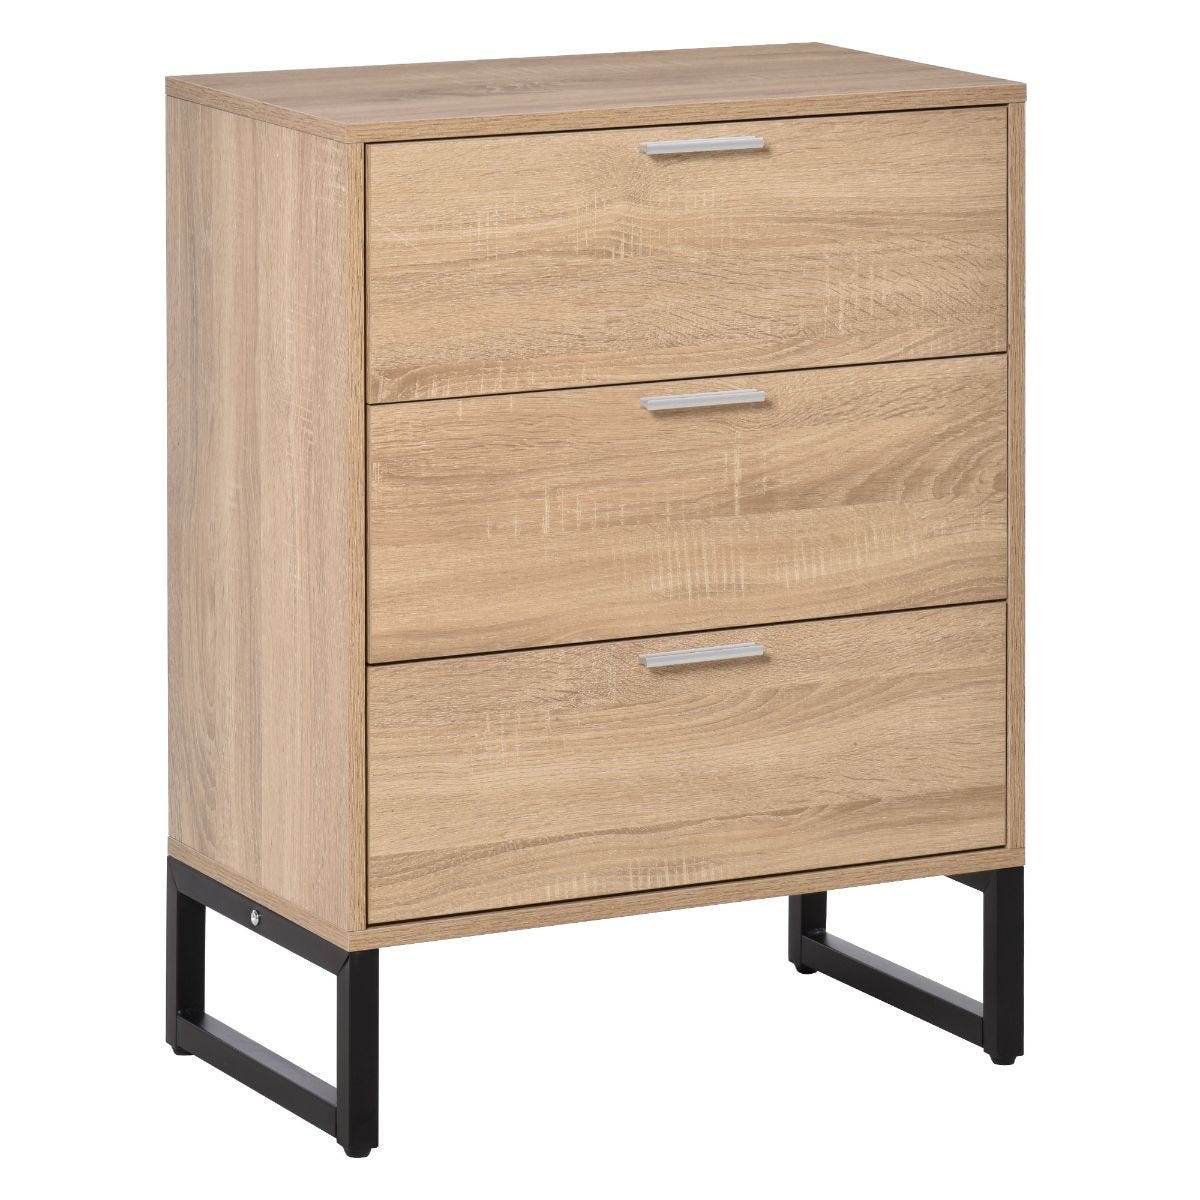 Homcom Chest Of 3 Drawers Natural Wood Colour Black Metal Cut Out Base